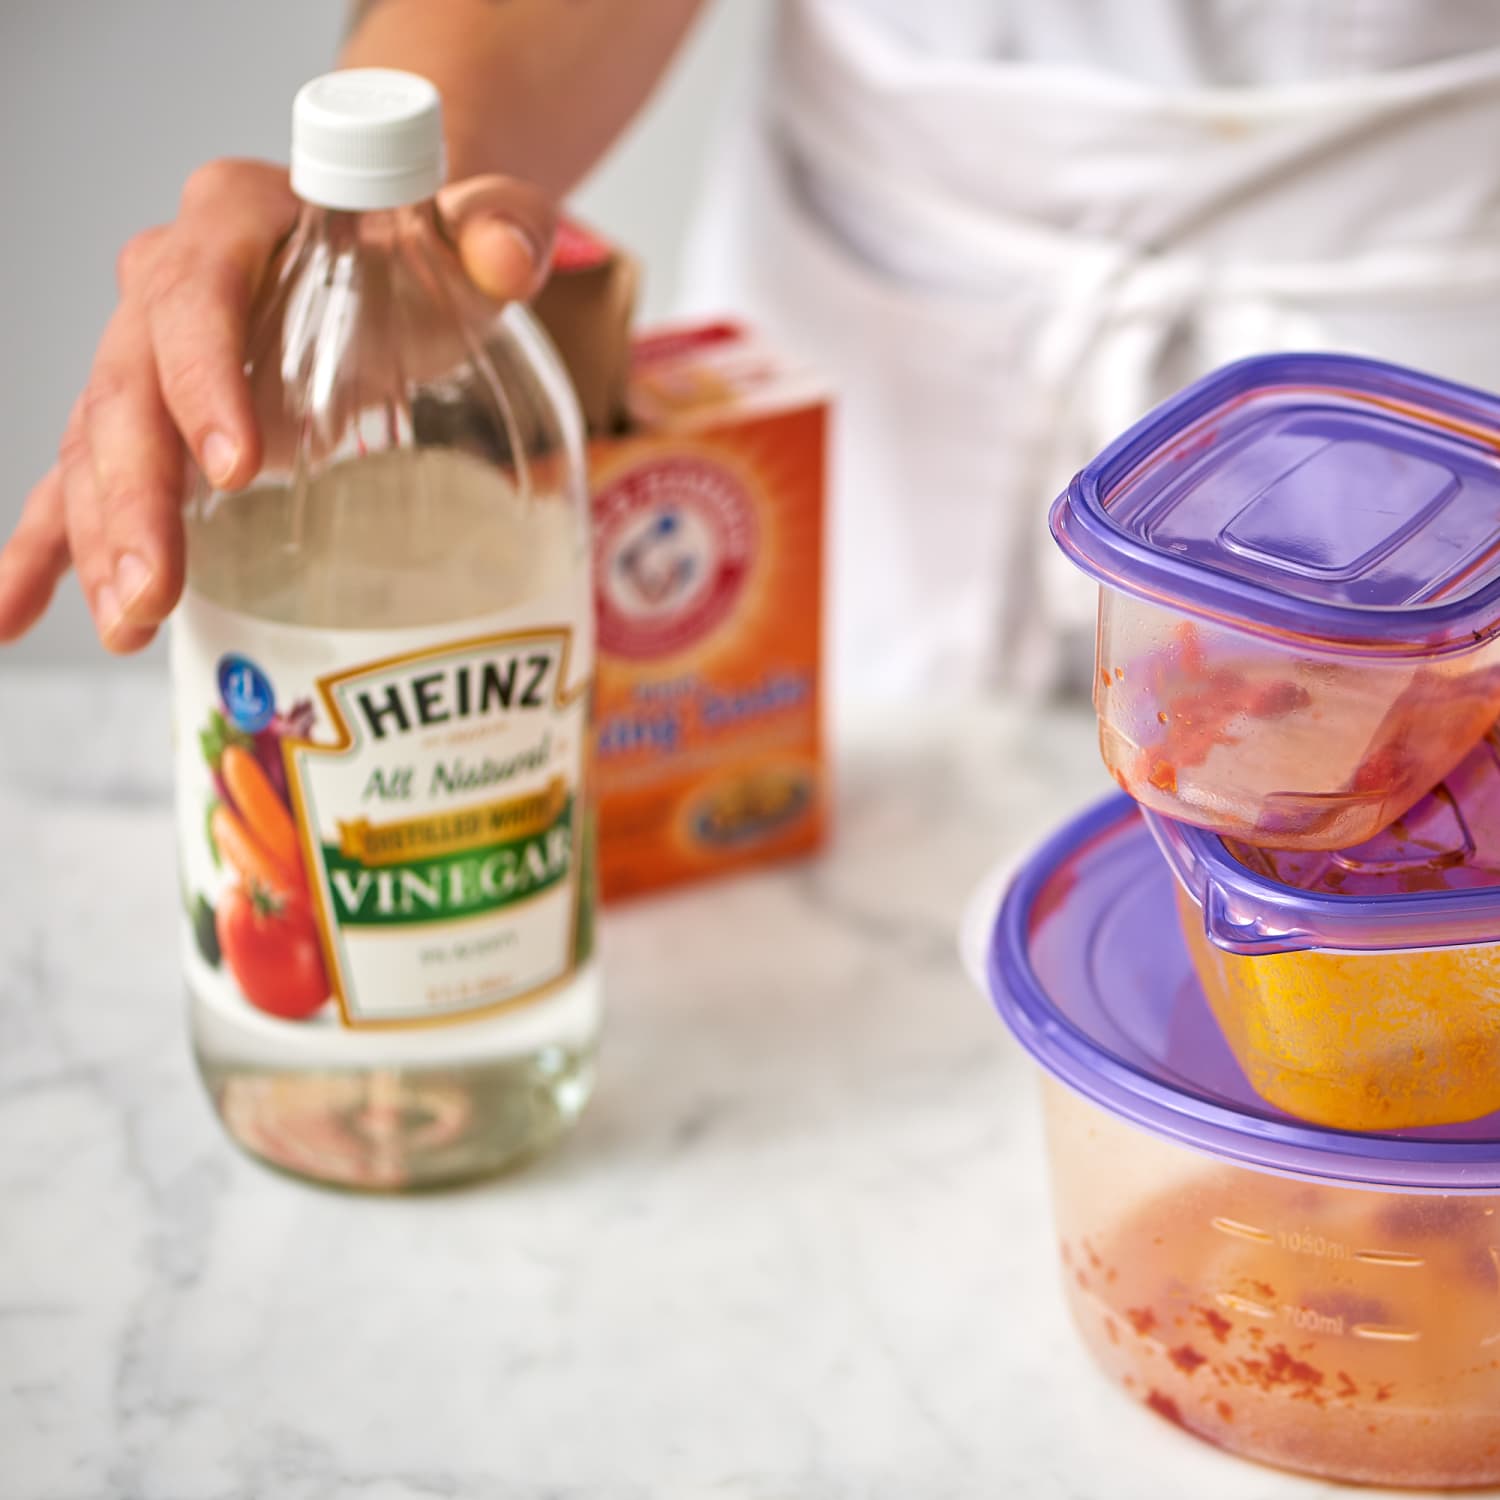 The Best Methods for Cleaning Stained Plastic Food Containers